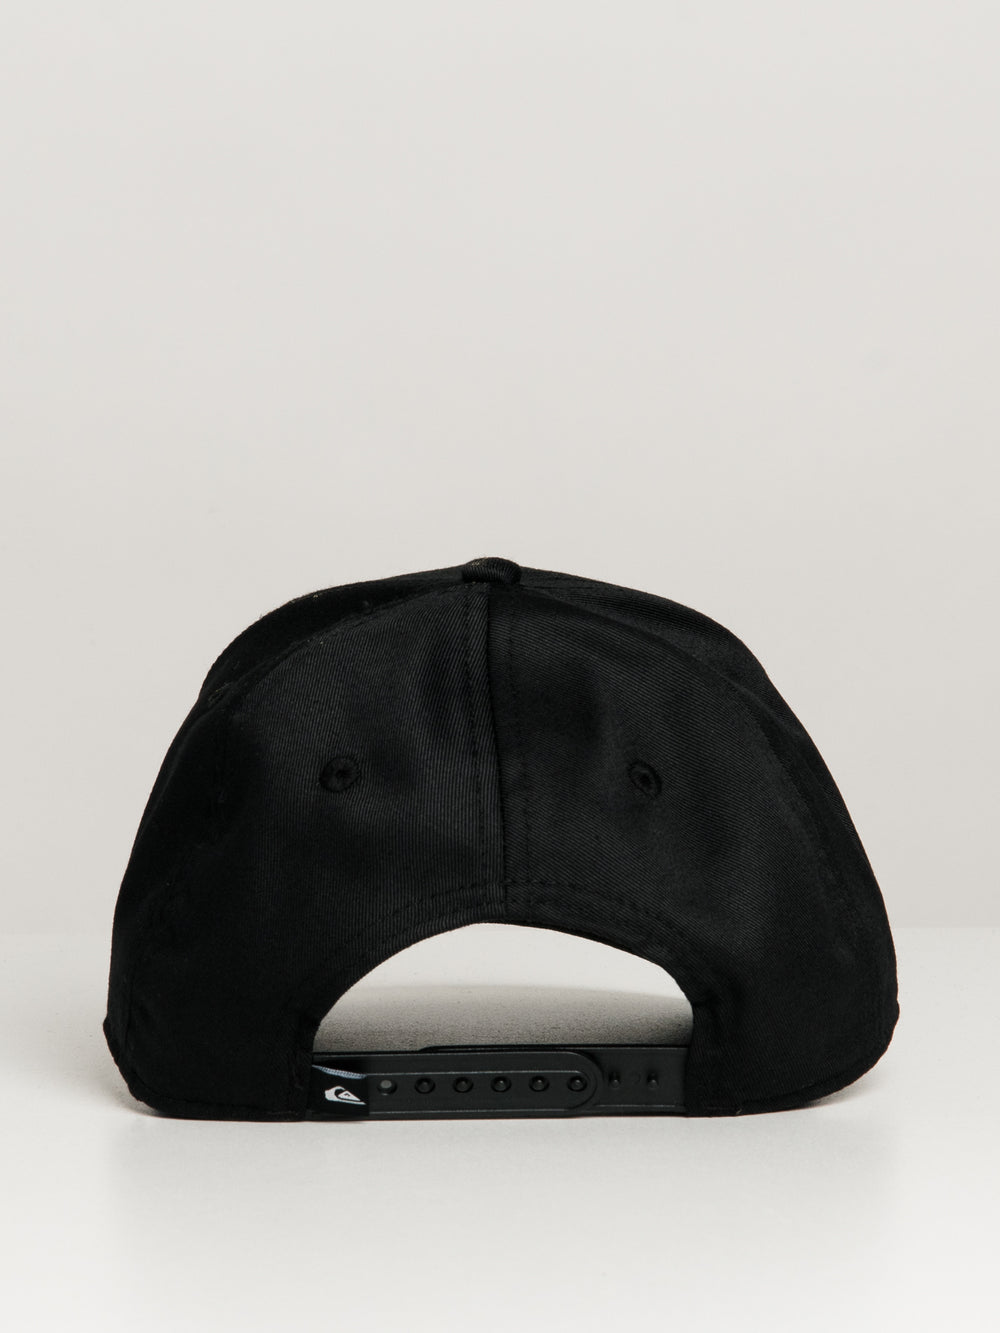 YOUTH QUIKSILVER DECADES HAT - CLEARANCE